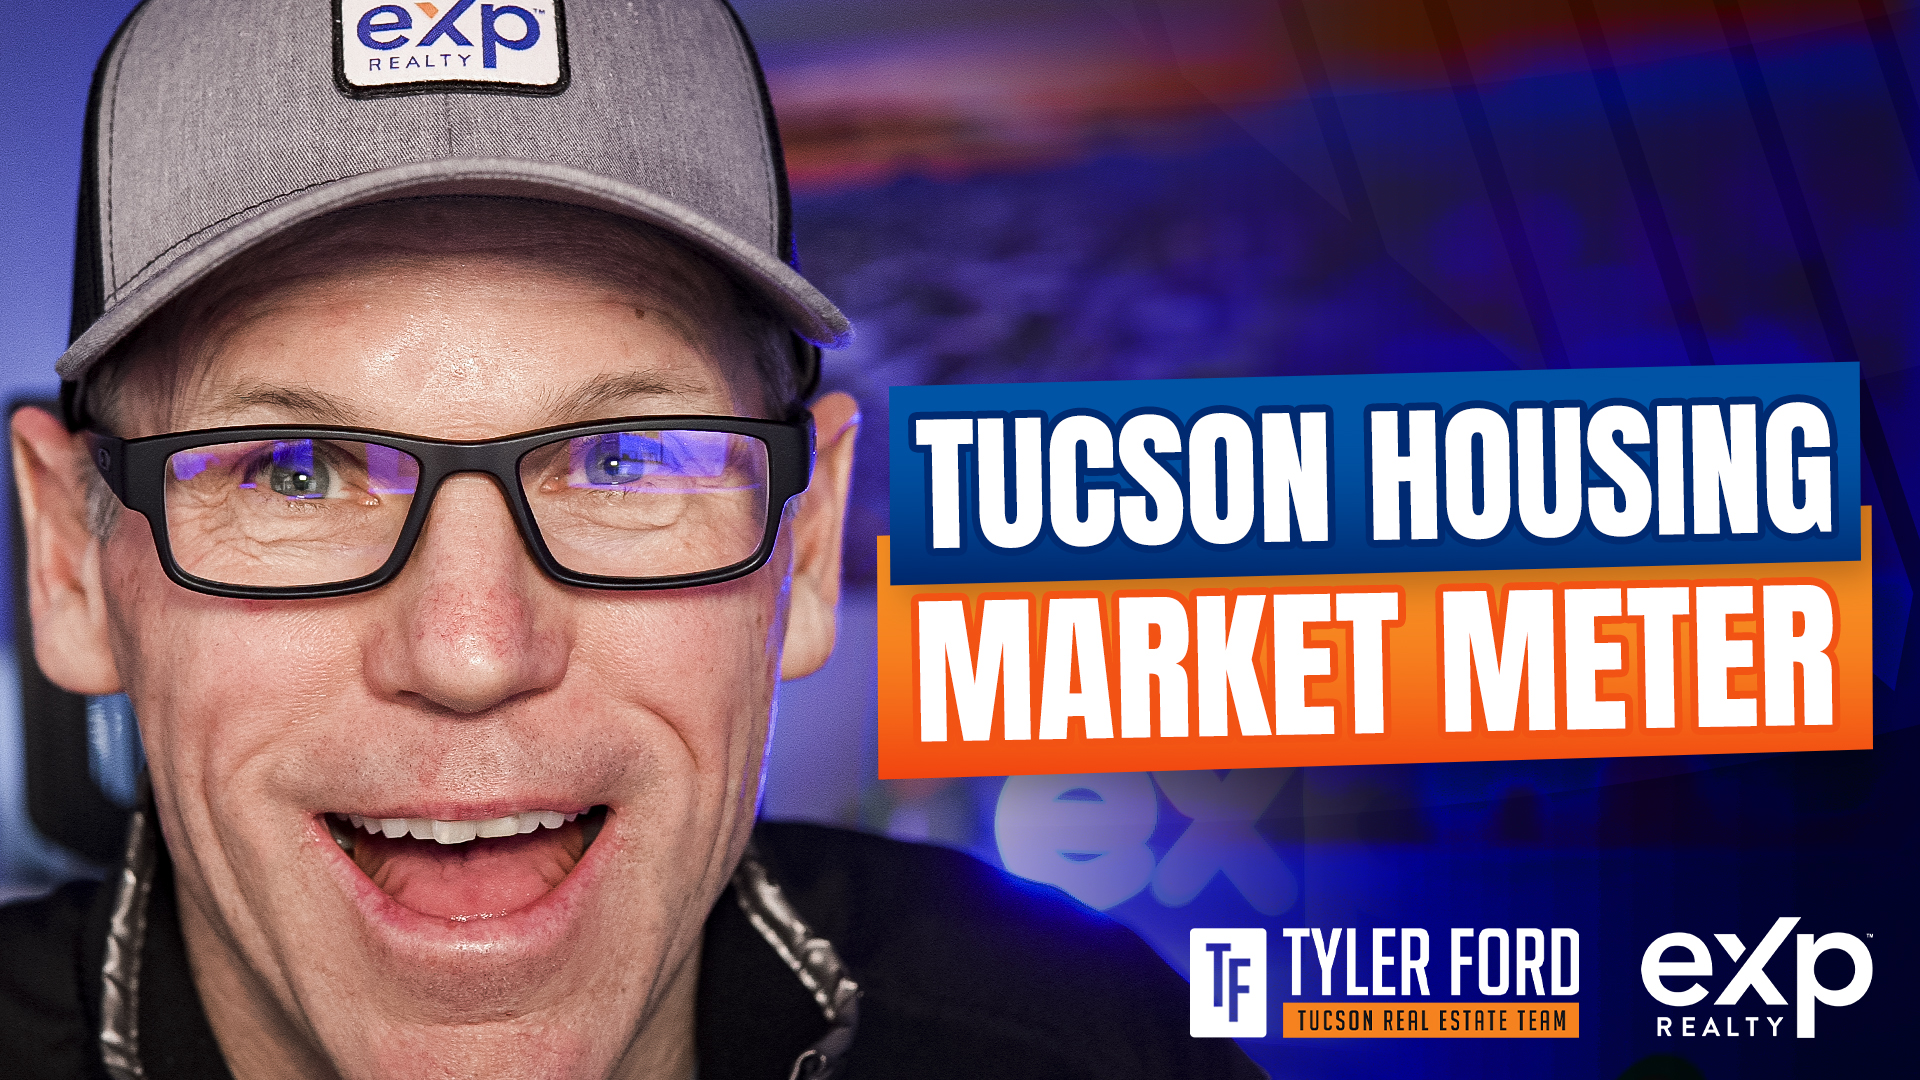 Is The Tucson Housing Market A Sellers, Buyers or Neutral Market